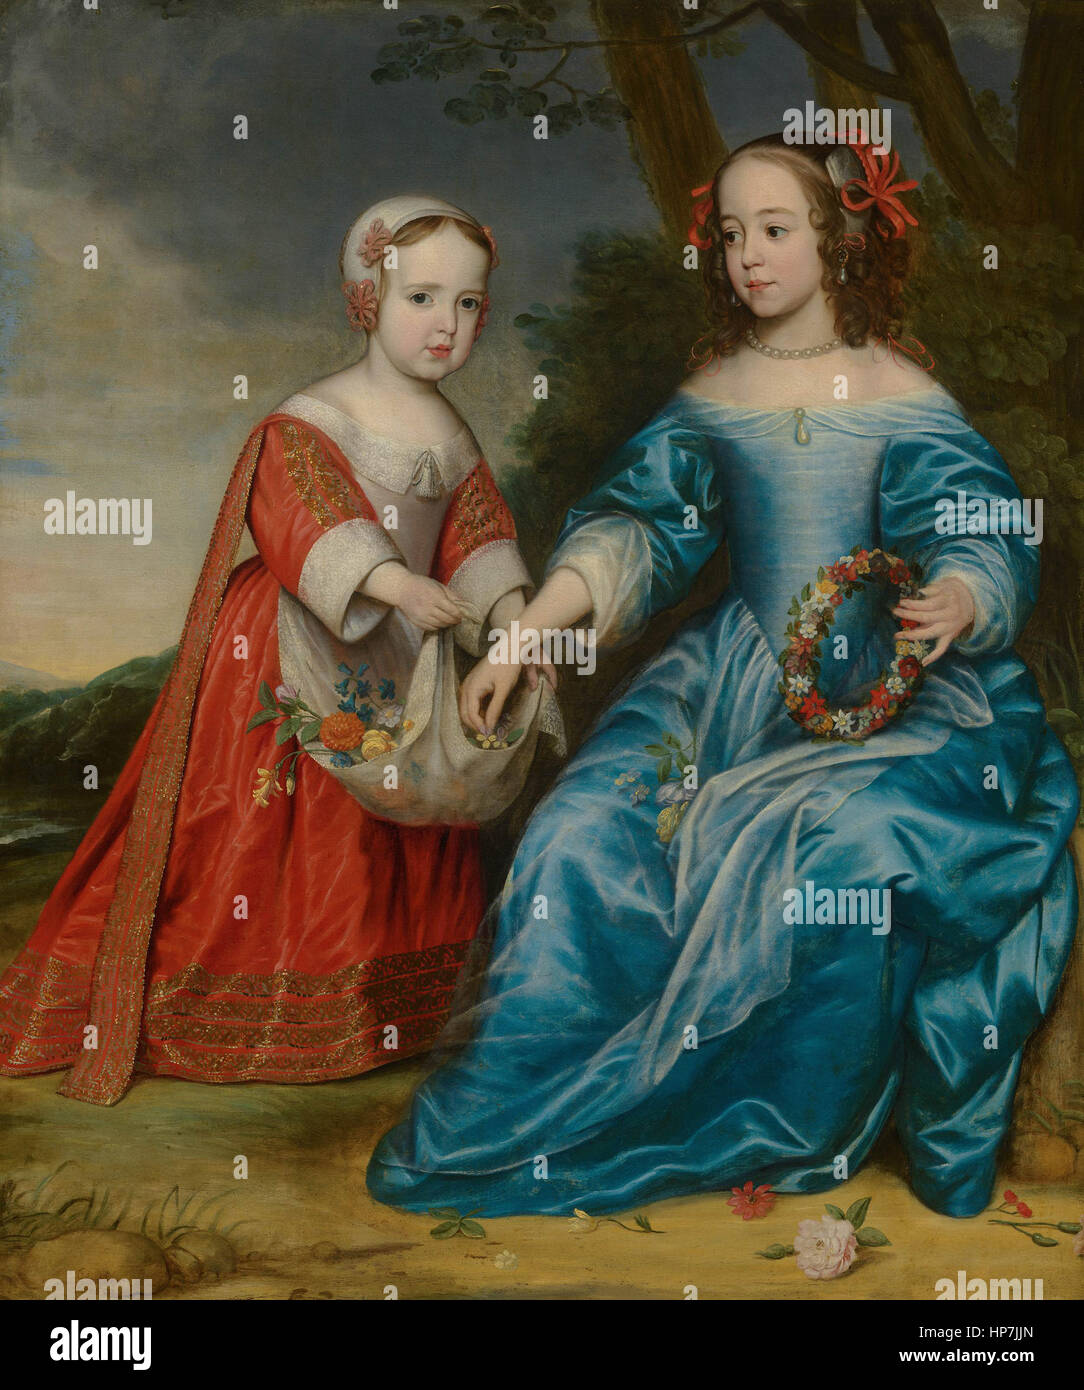 Gerard van Honthorst  Double Portrait of Prince Willem III (1650- 1702) and his Aunt Maria, Princess of Orange (1642-1688), as Children   - Mauritshuis Museum The Hague Stock Photo